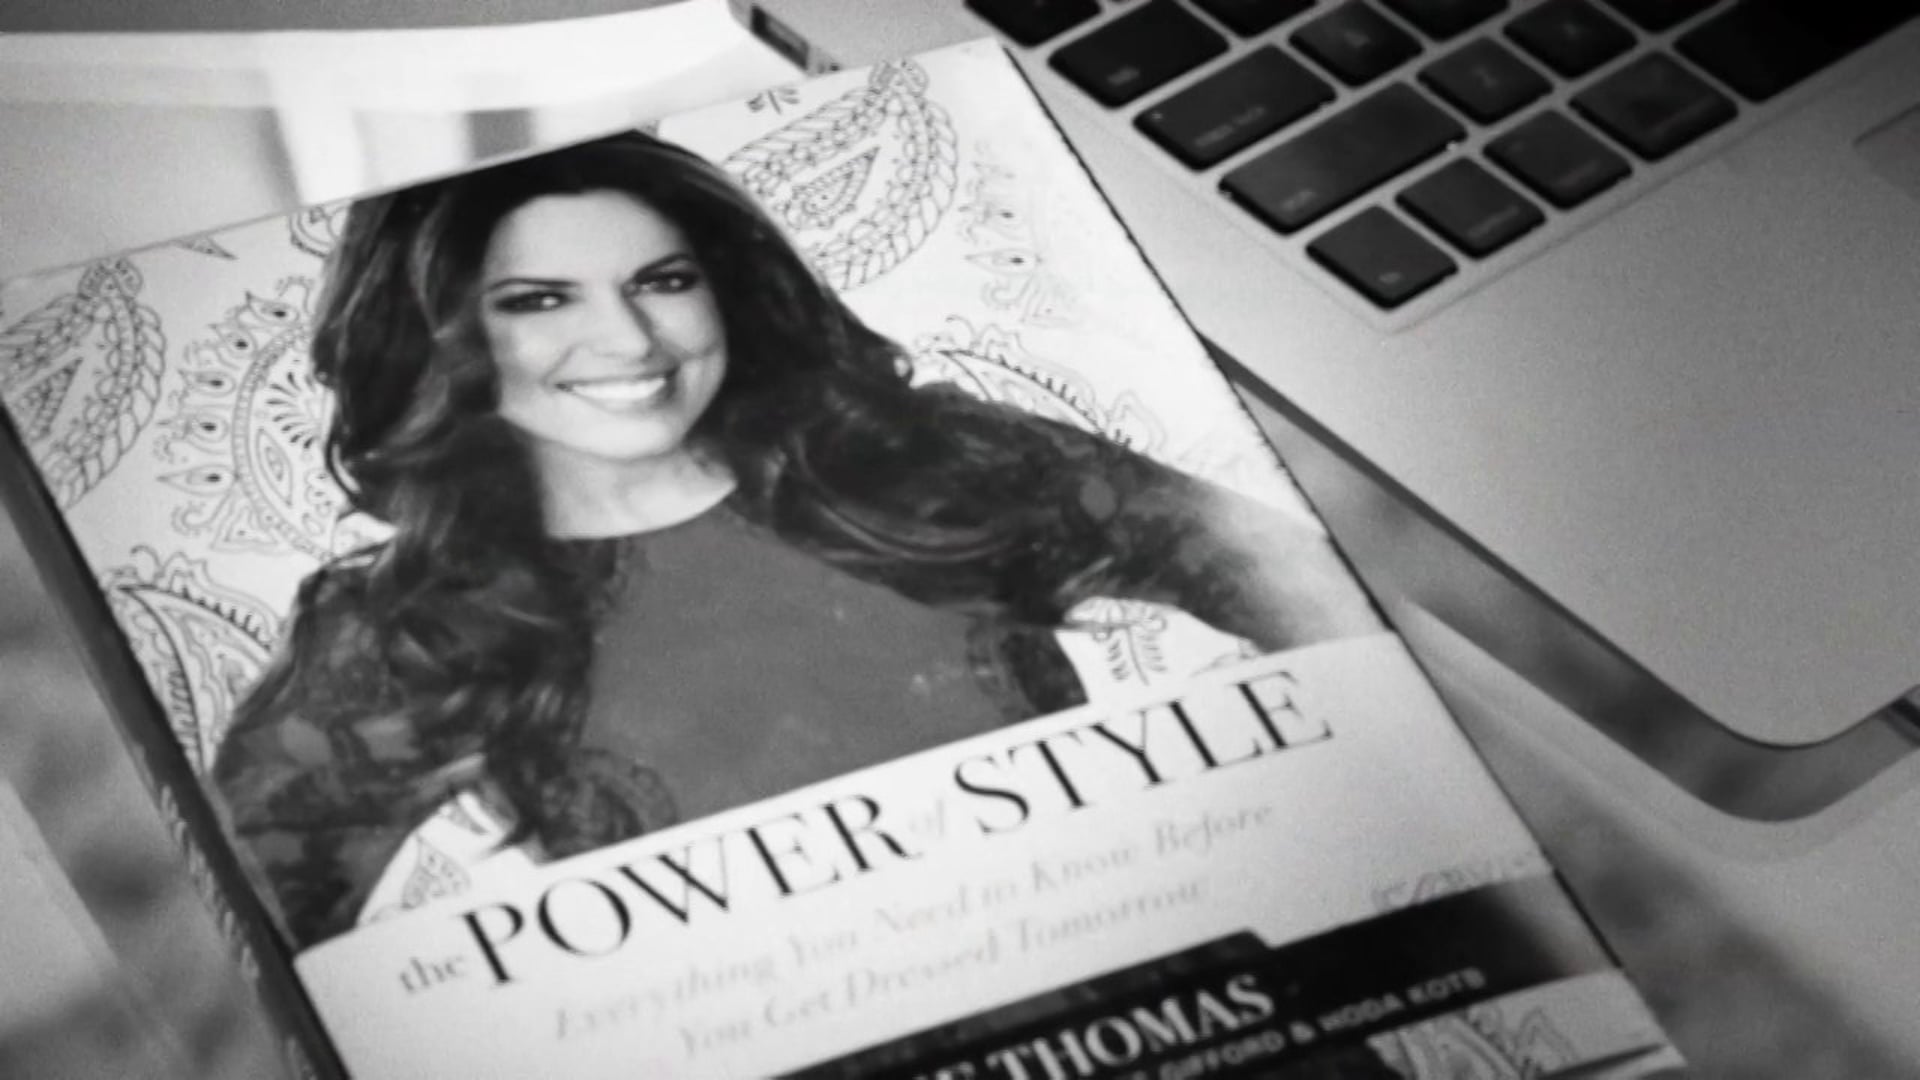 Book Trailer: The Power of Style by Bobbie Thomas (HarperCollins)